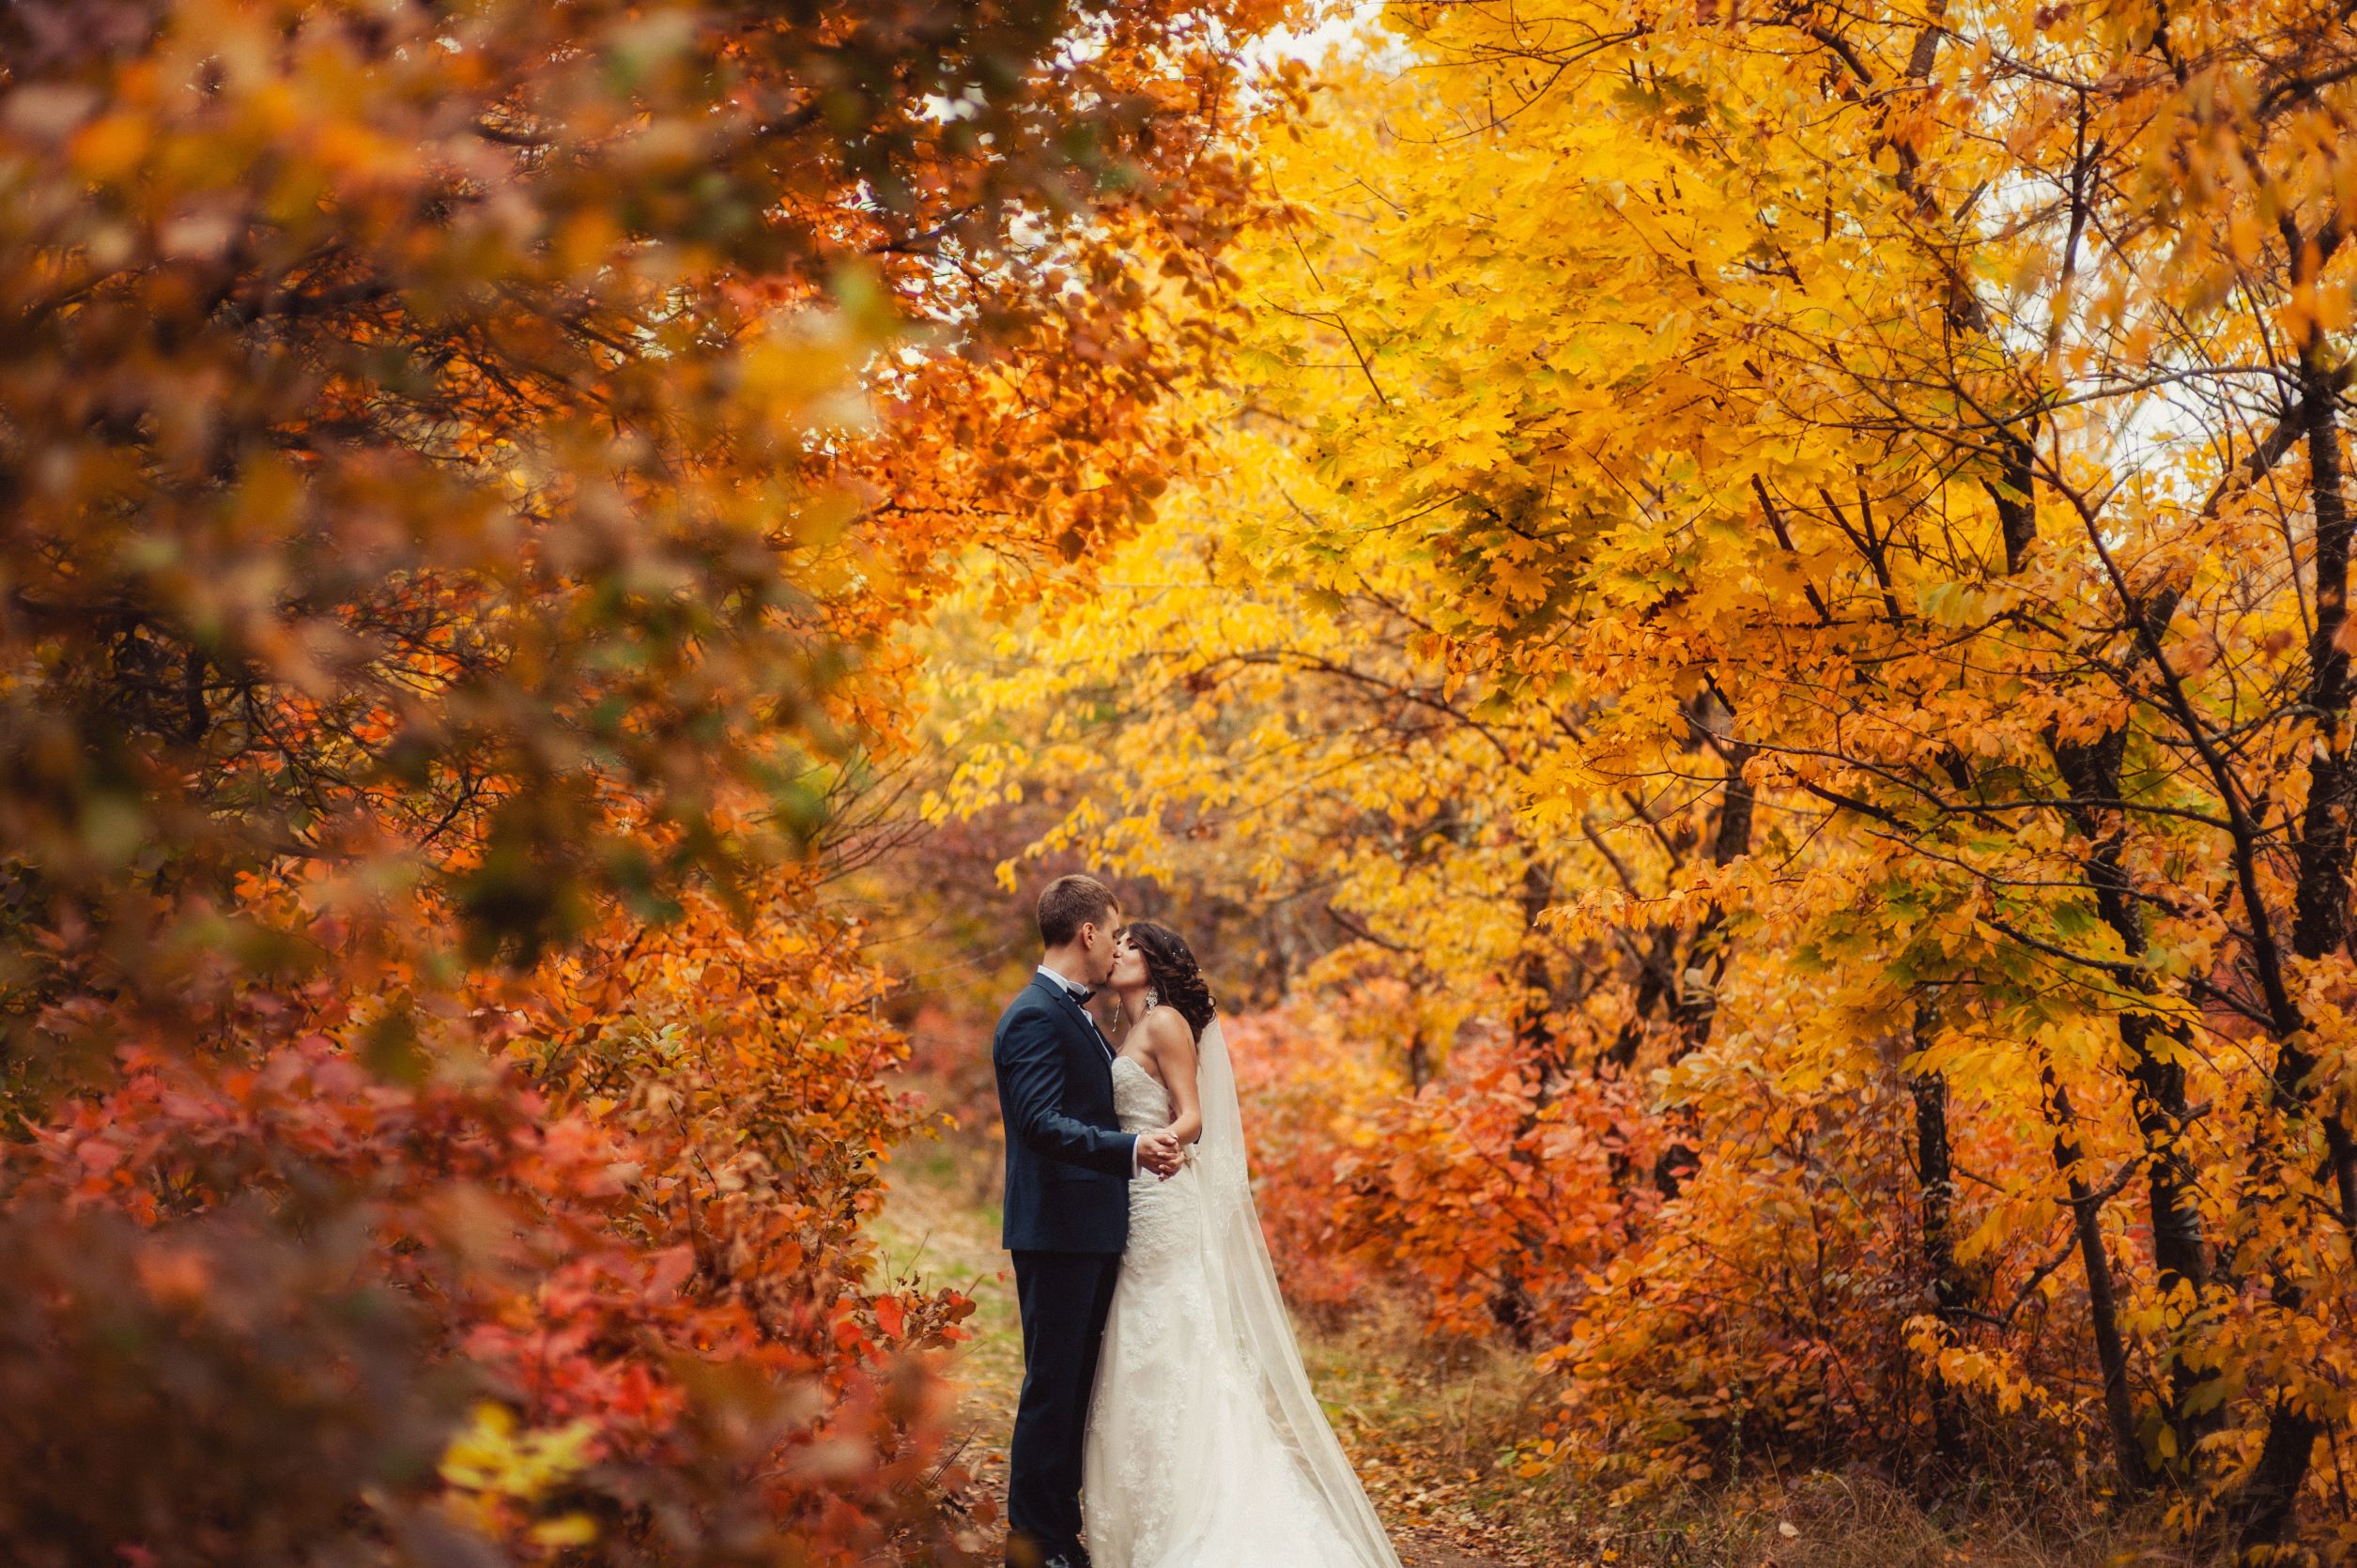 bride in navy suit, kissing his bride, surrounded by trees in fall colors